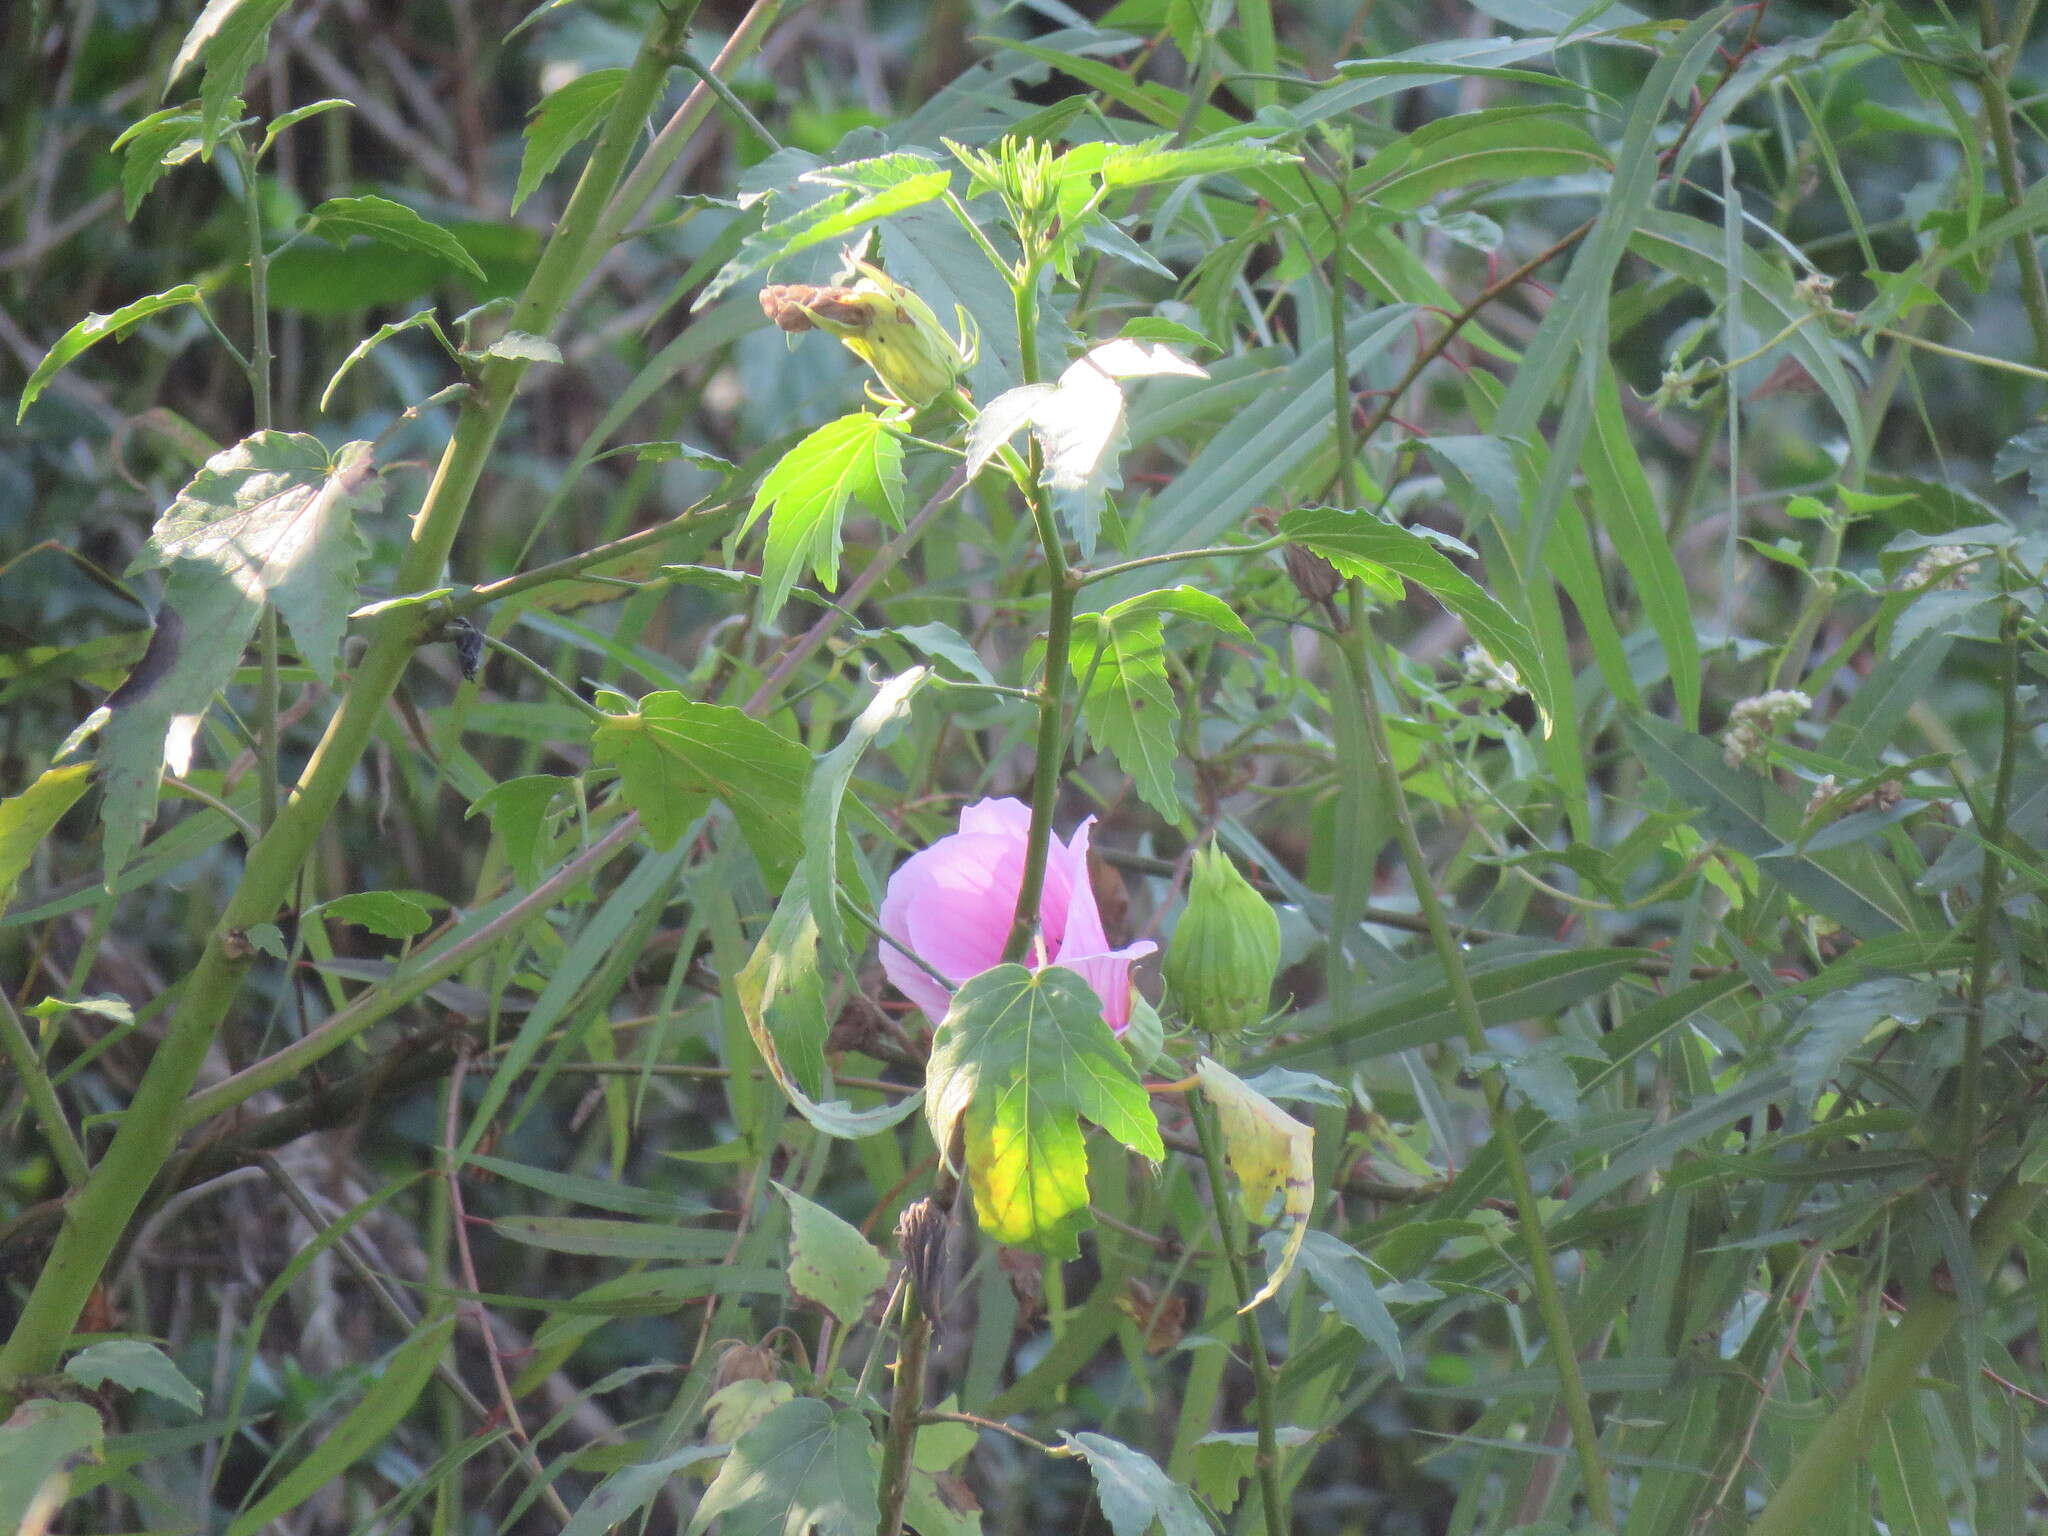 Image of striped rosemallow